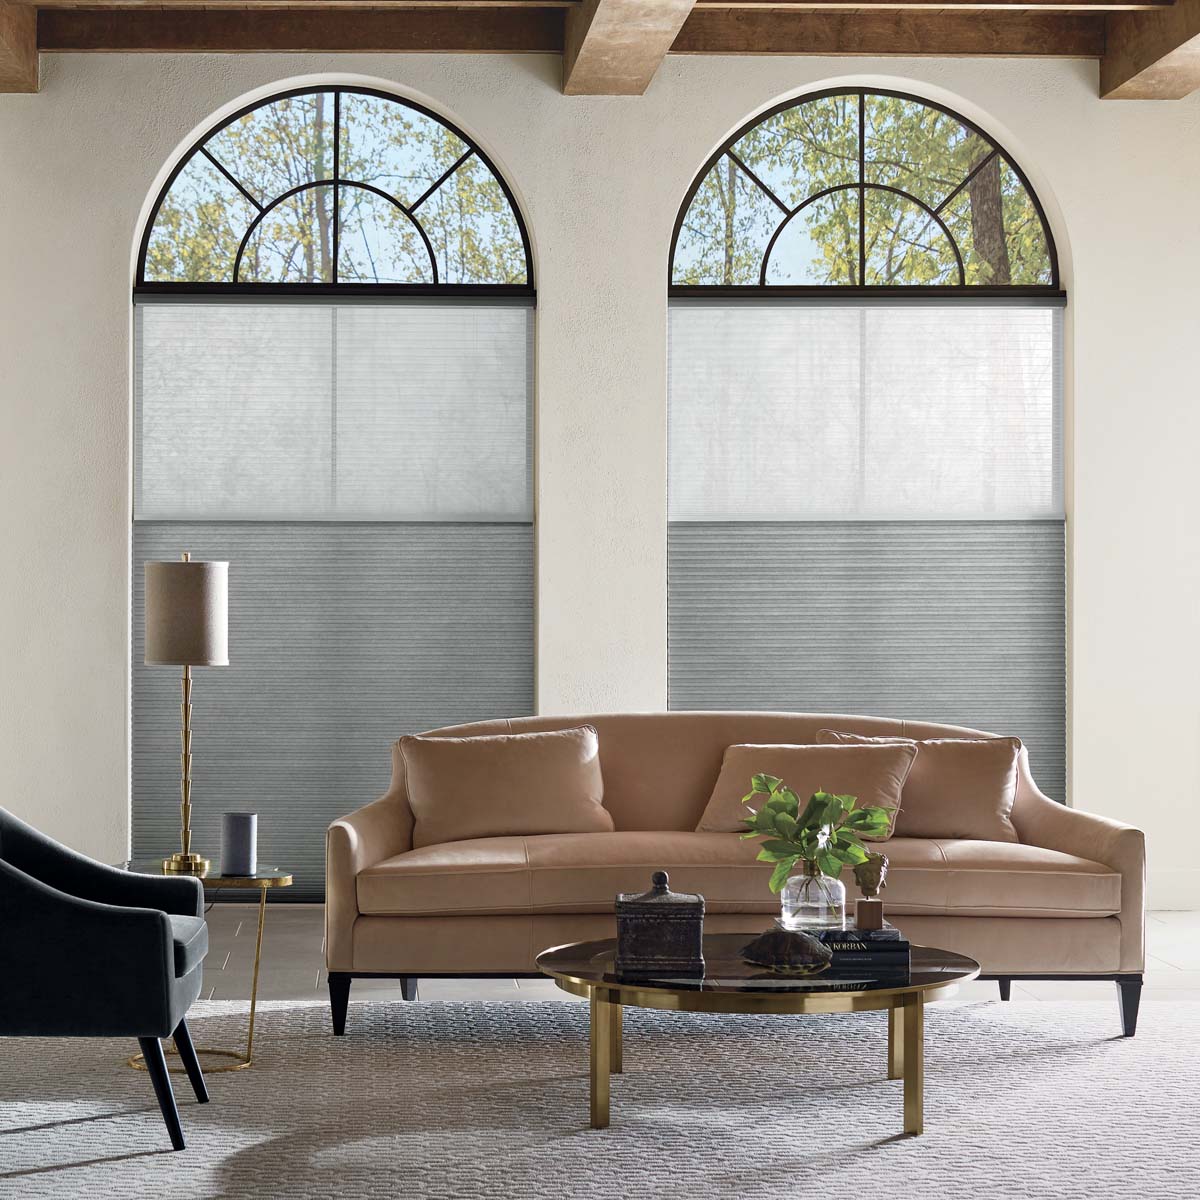 Duette® Honeycomb Shades